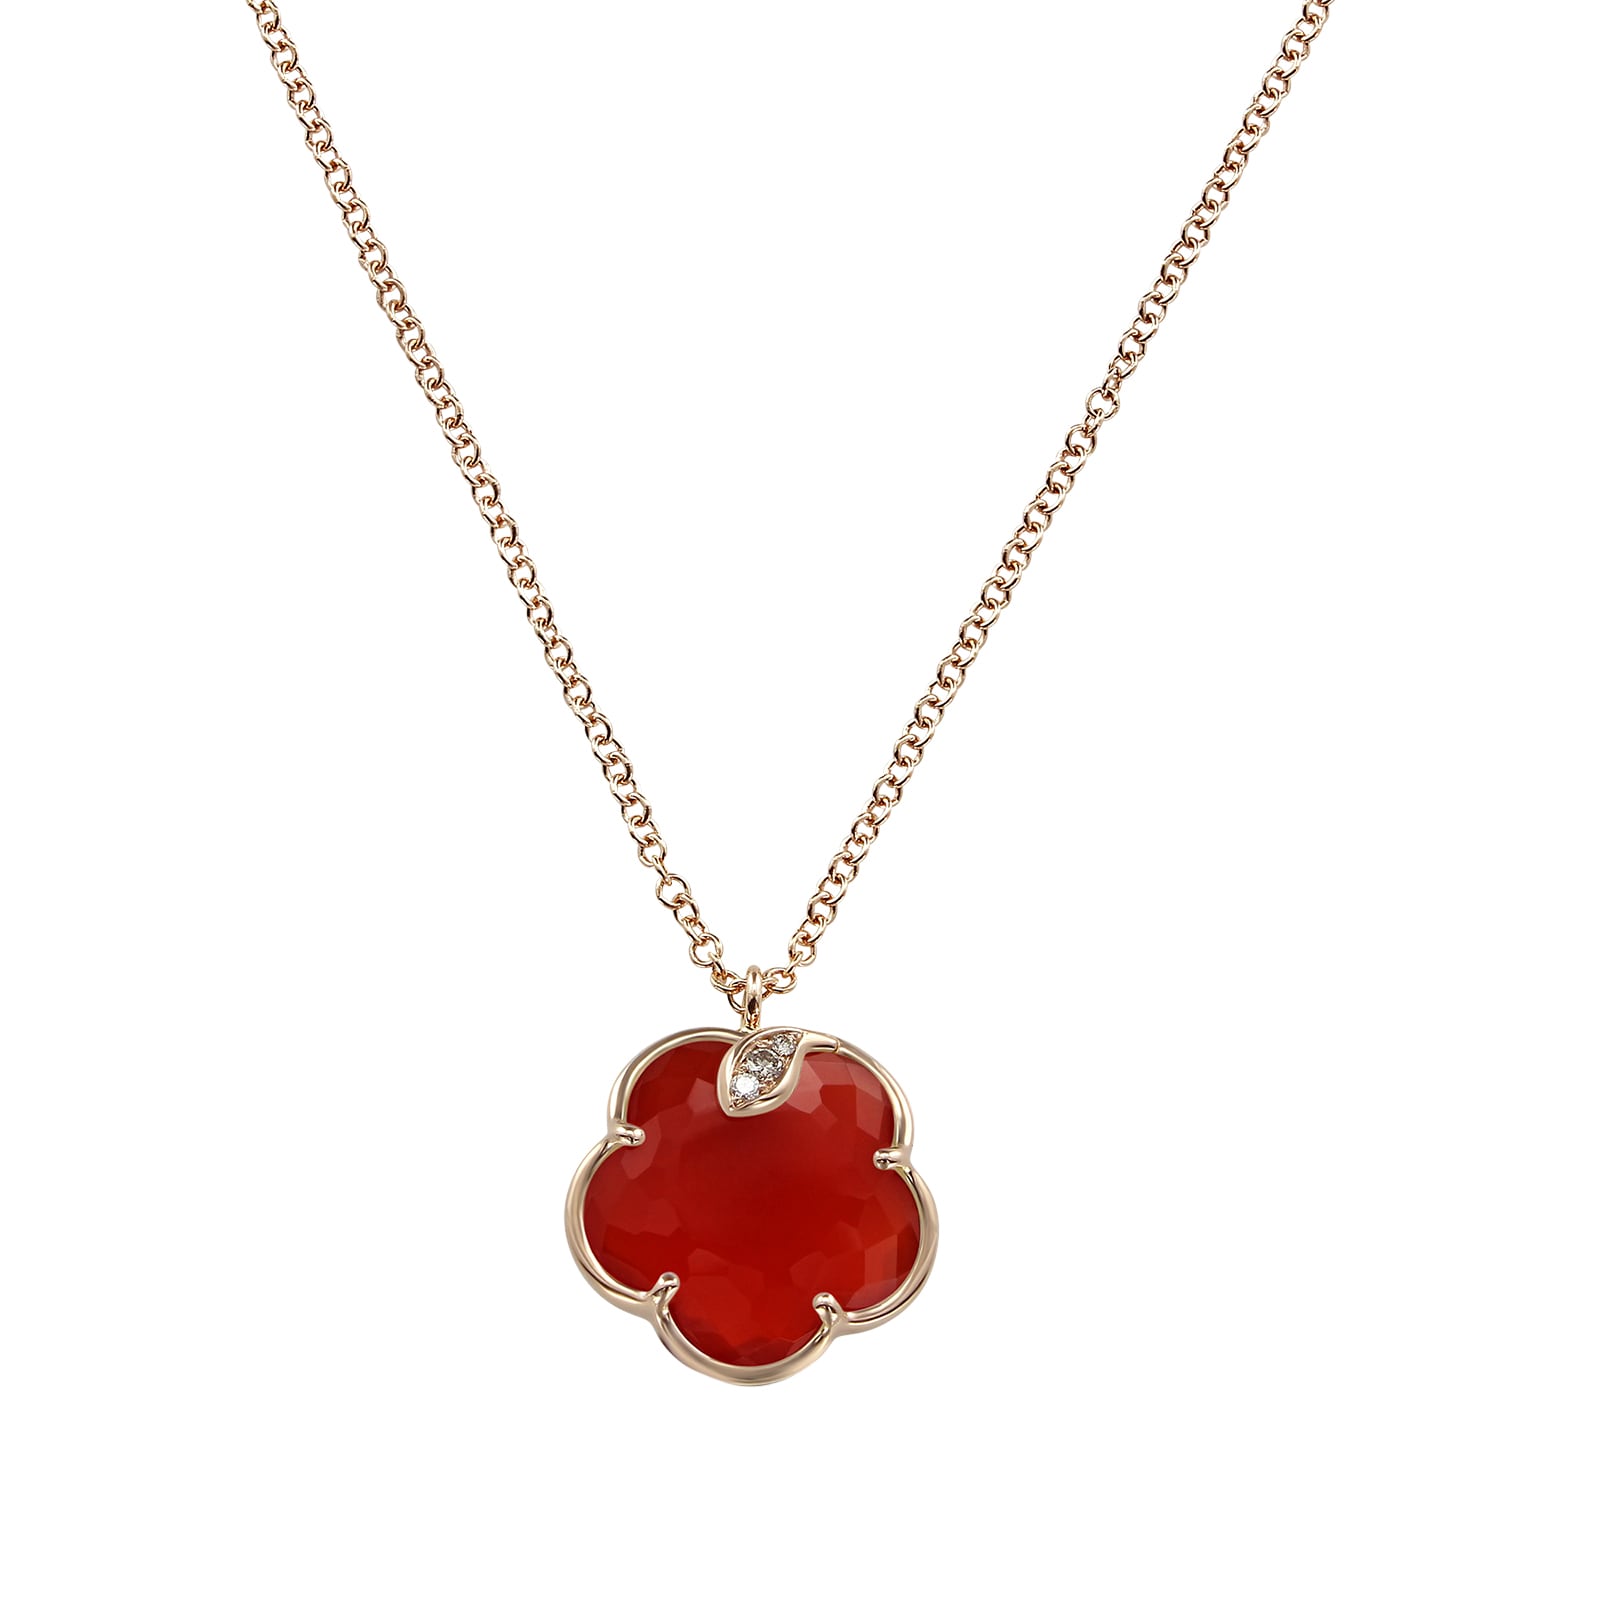 Petit Joli Necklace in 18ct Rose Gold with Carnelian and Diamonds